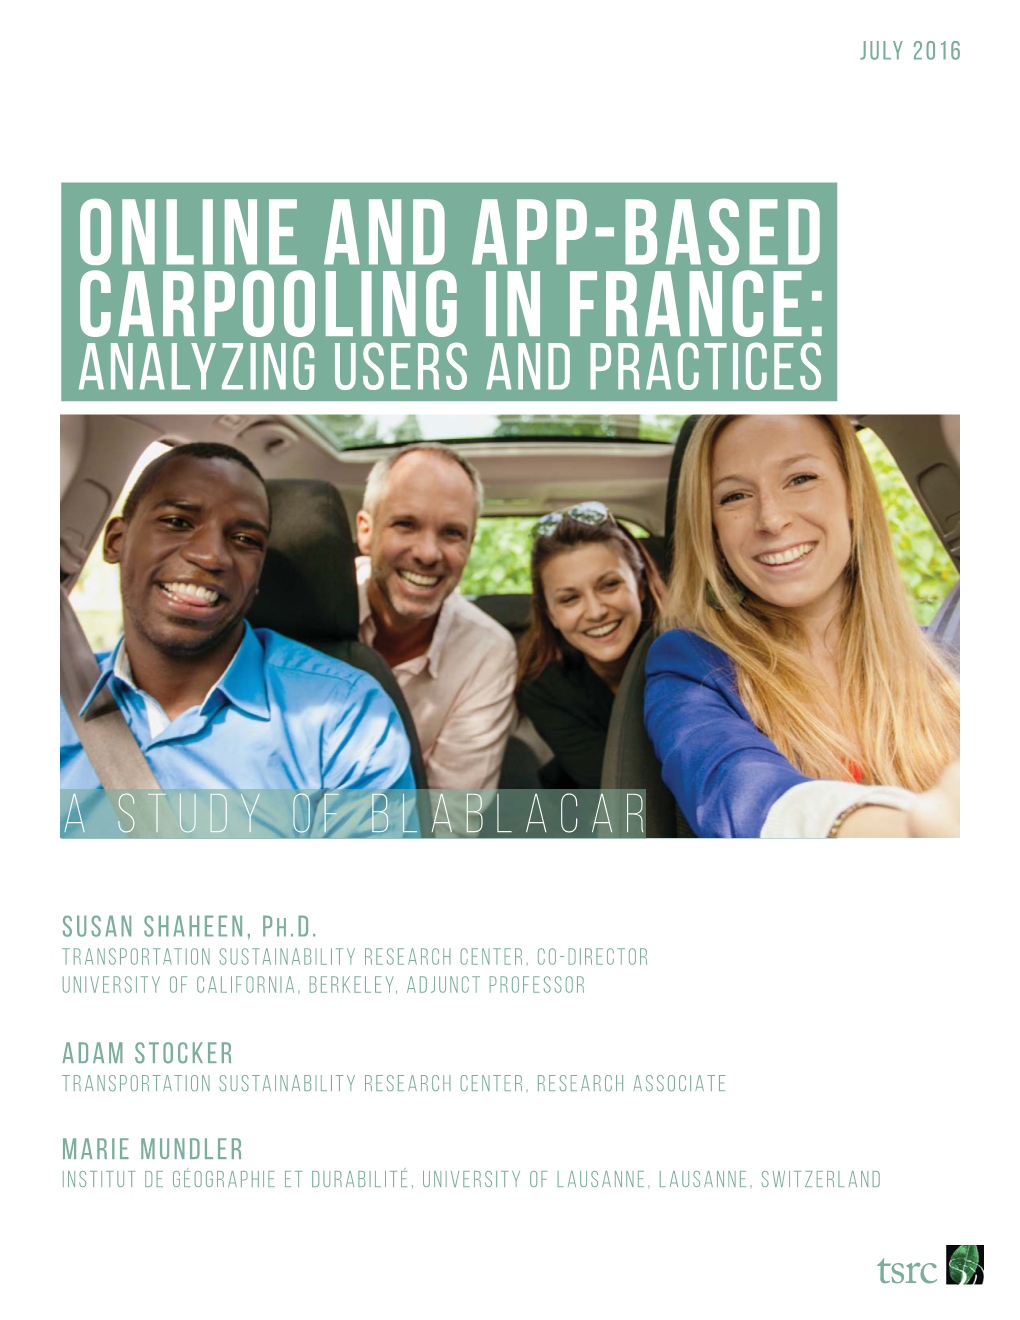 Online and App-Based Carpooling in France: Analyzing Users and Practices